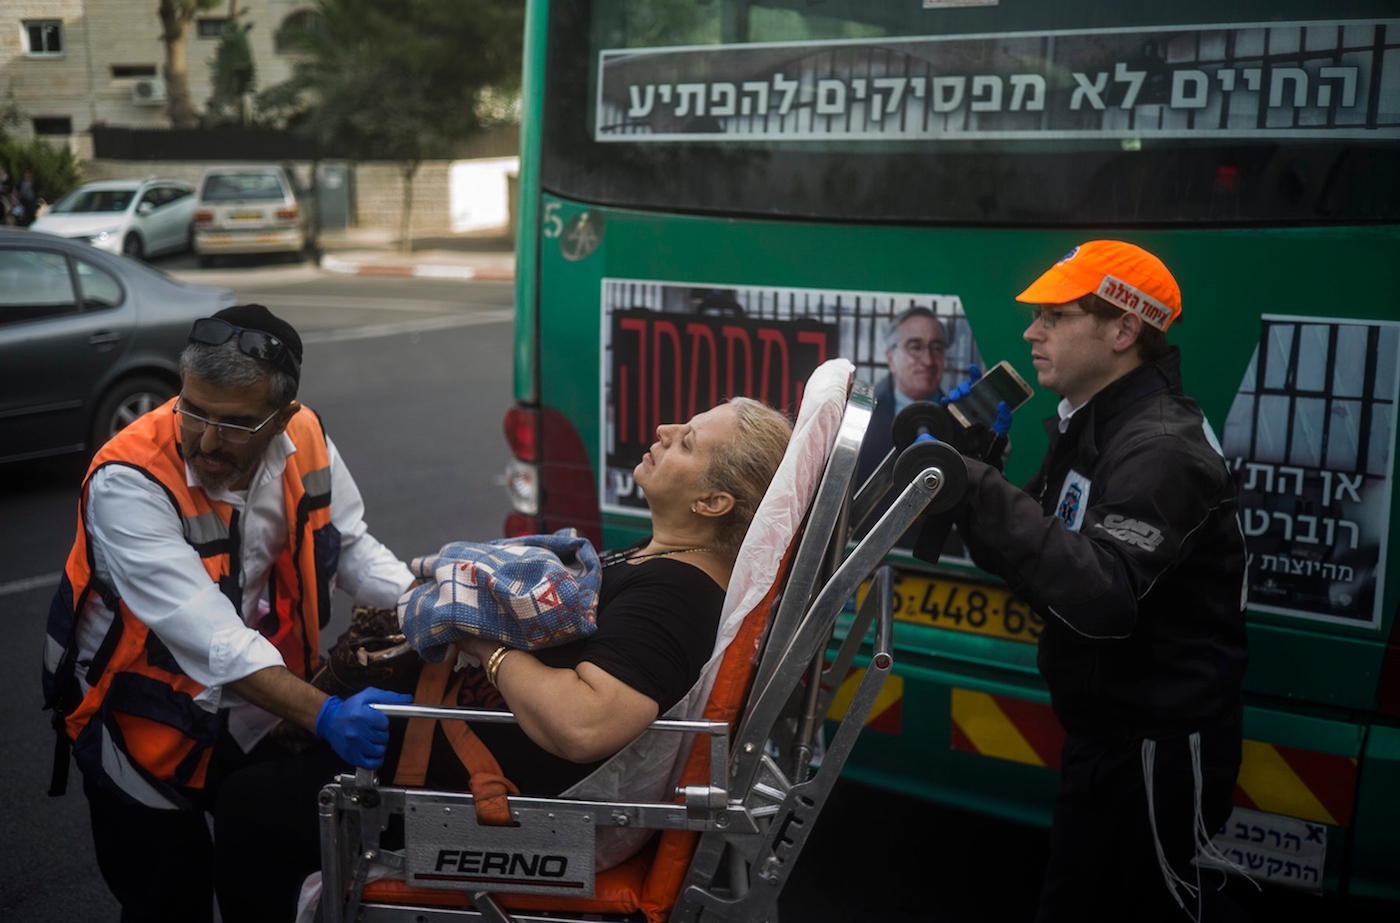 An injured woman being transferred to a hospital after a Palestinian man attacked passengers on a bus in Jerusalem, Oct. 12, 2015. (Ilia Yefimovich/Getty Images)